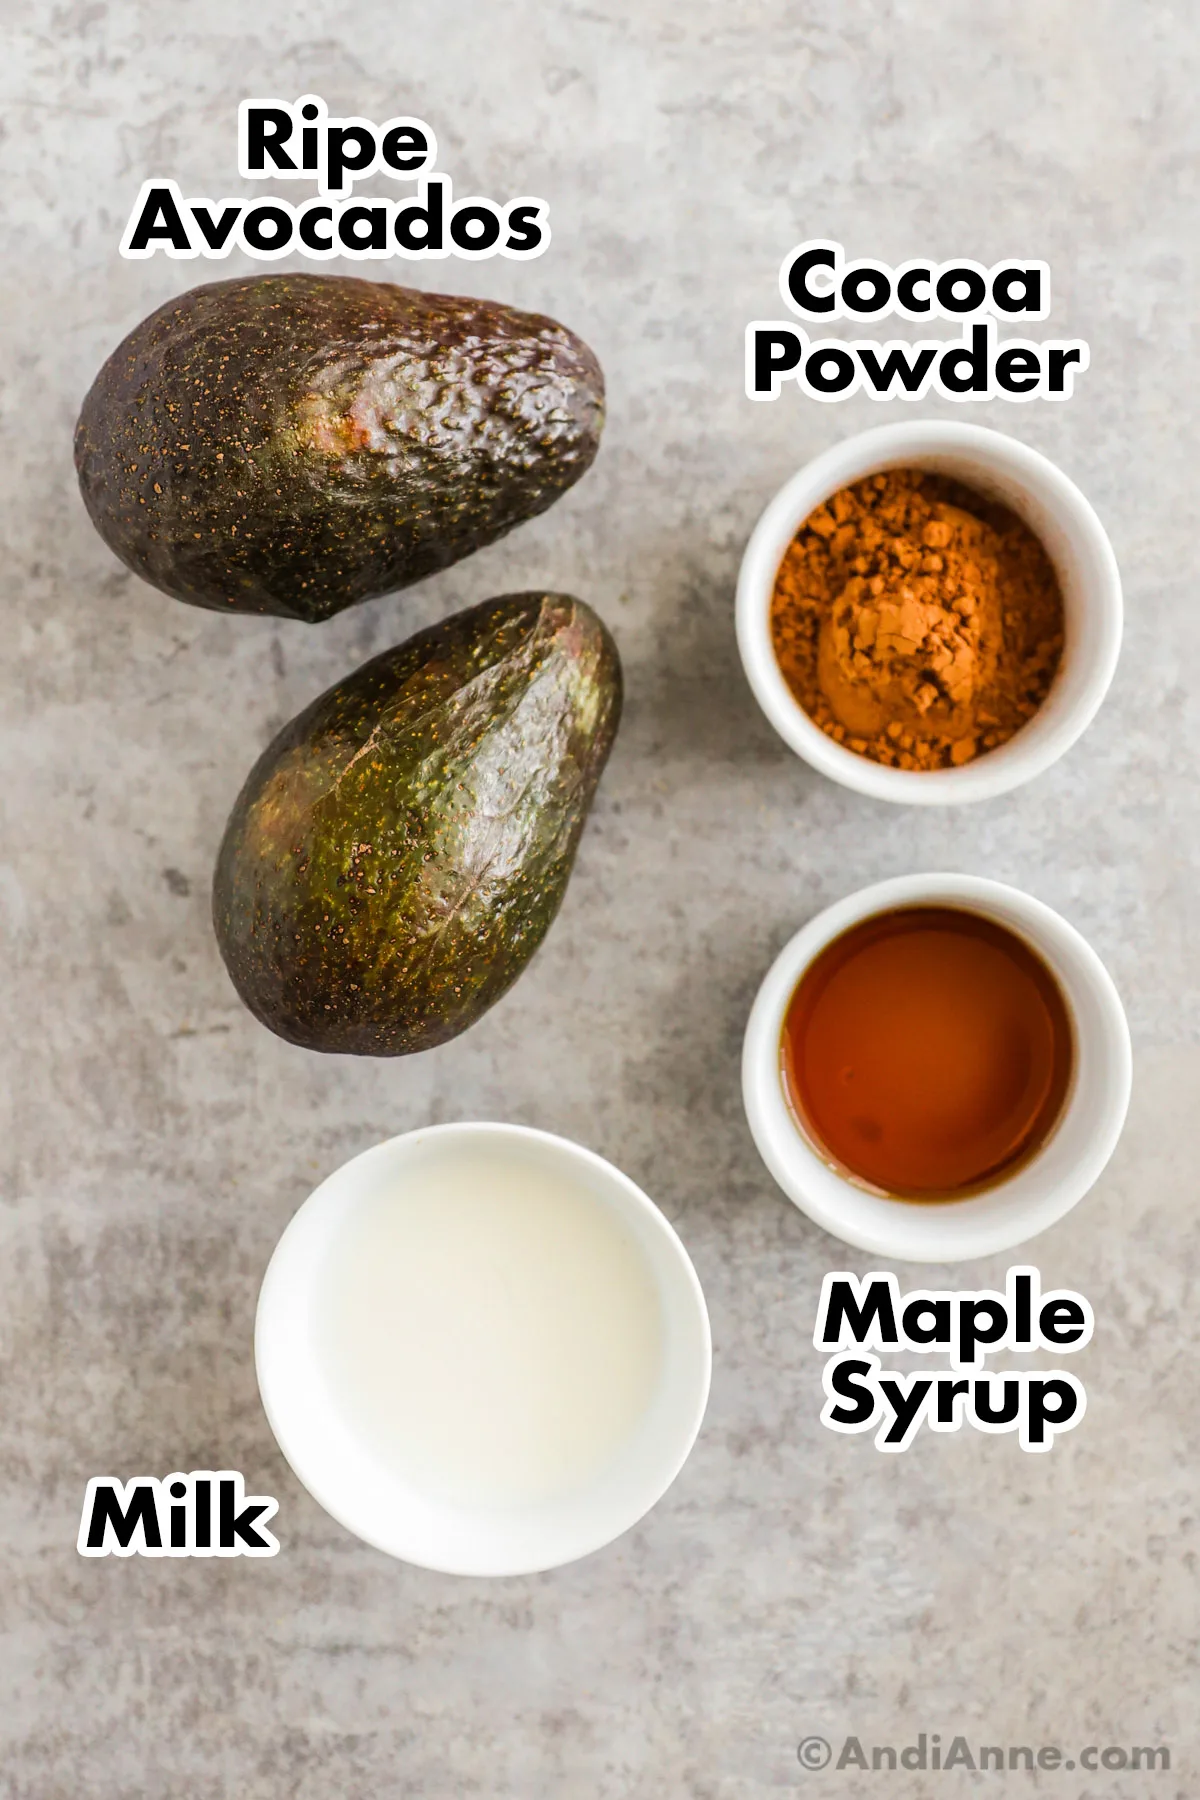 Recipe ingredients on the counter including two ripe avocados, cocoa powder, maple syrup, and milk.